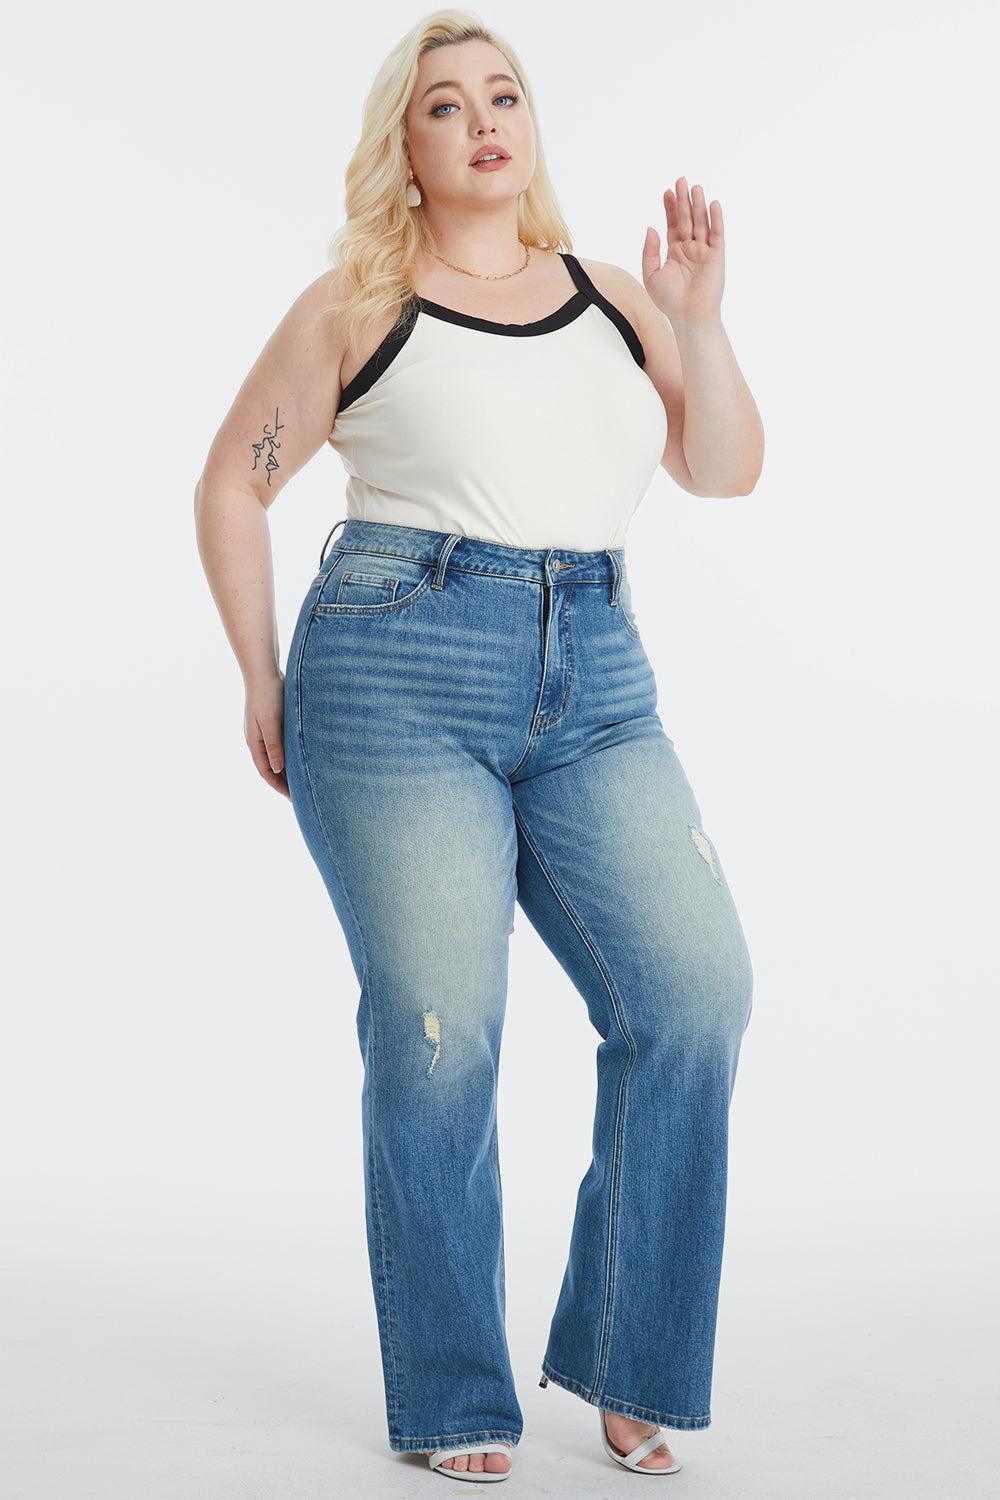 a woman in a white tank top and blue jeans